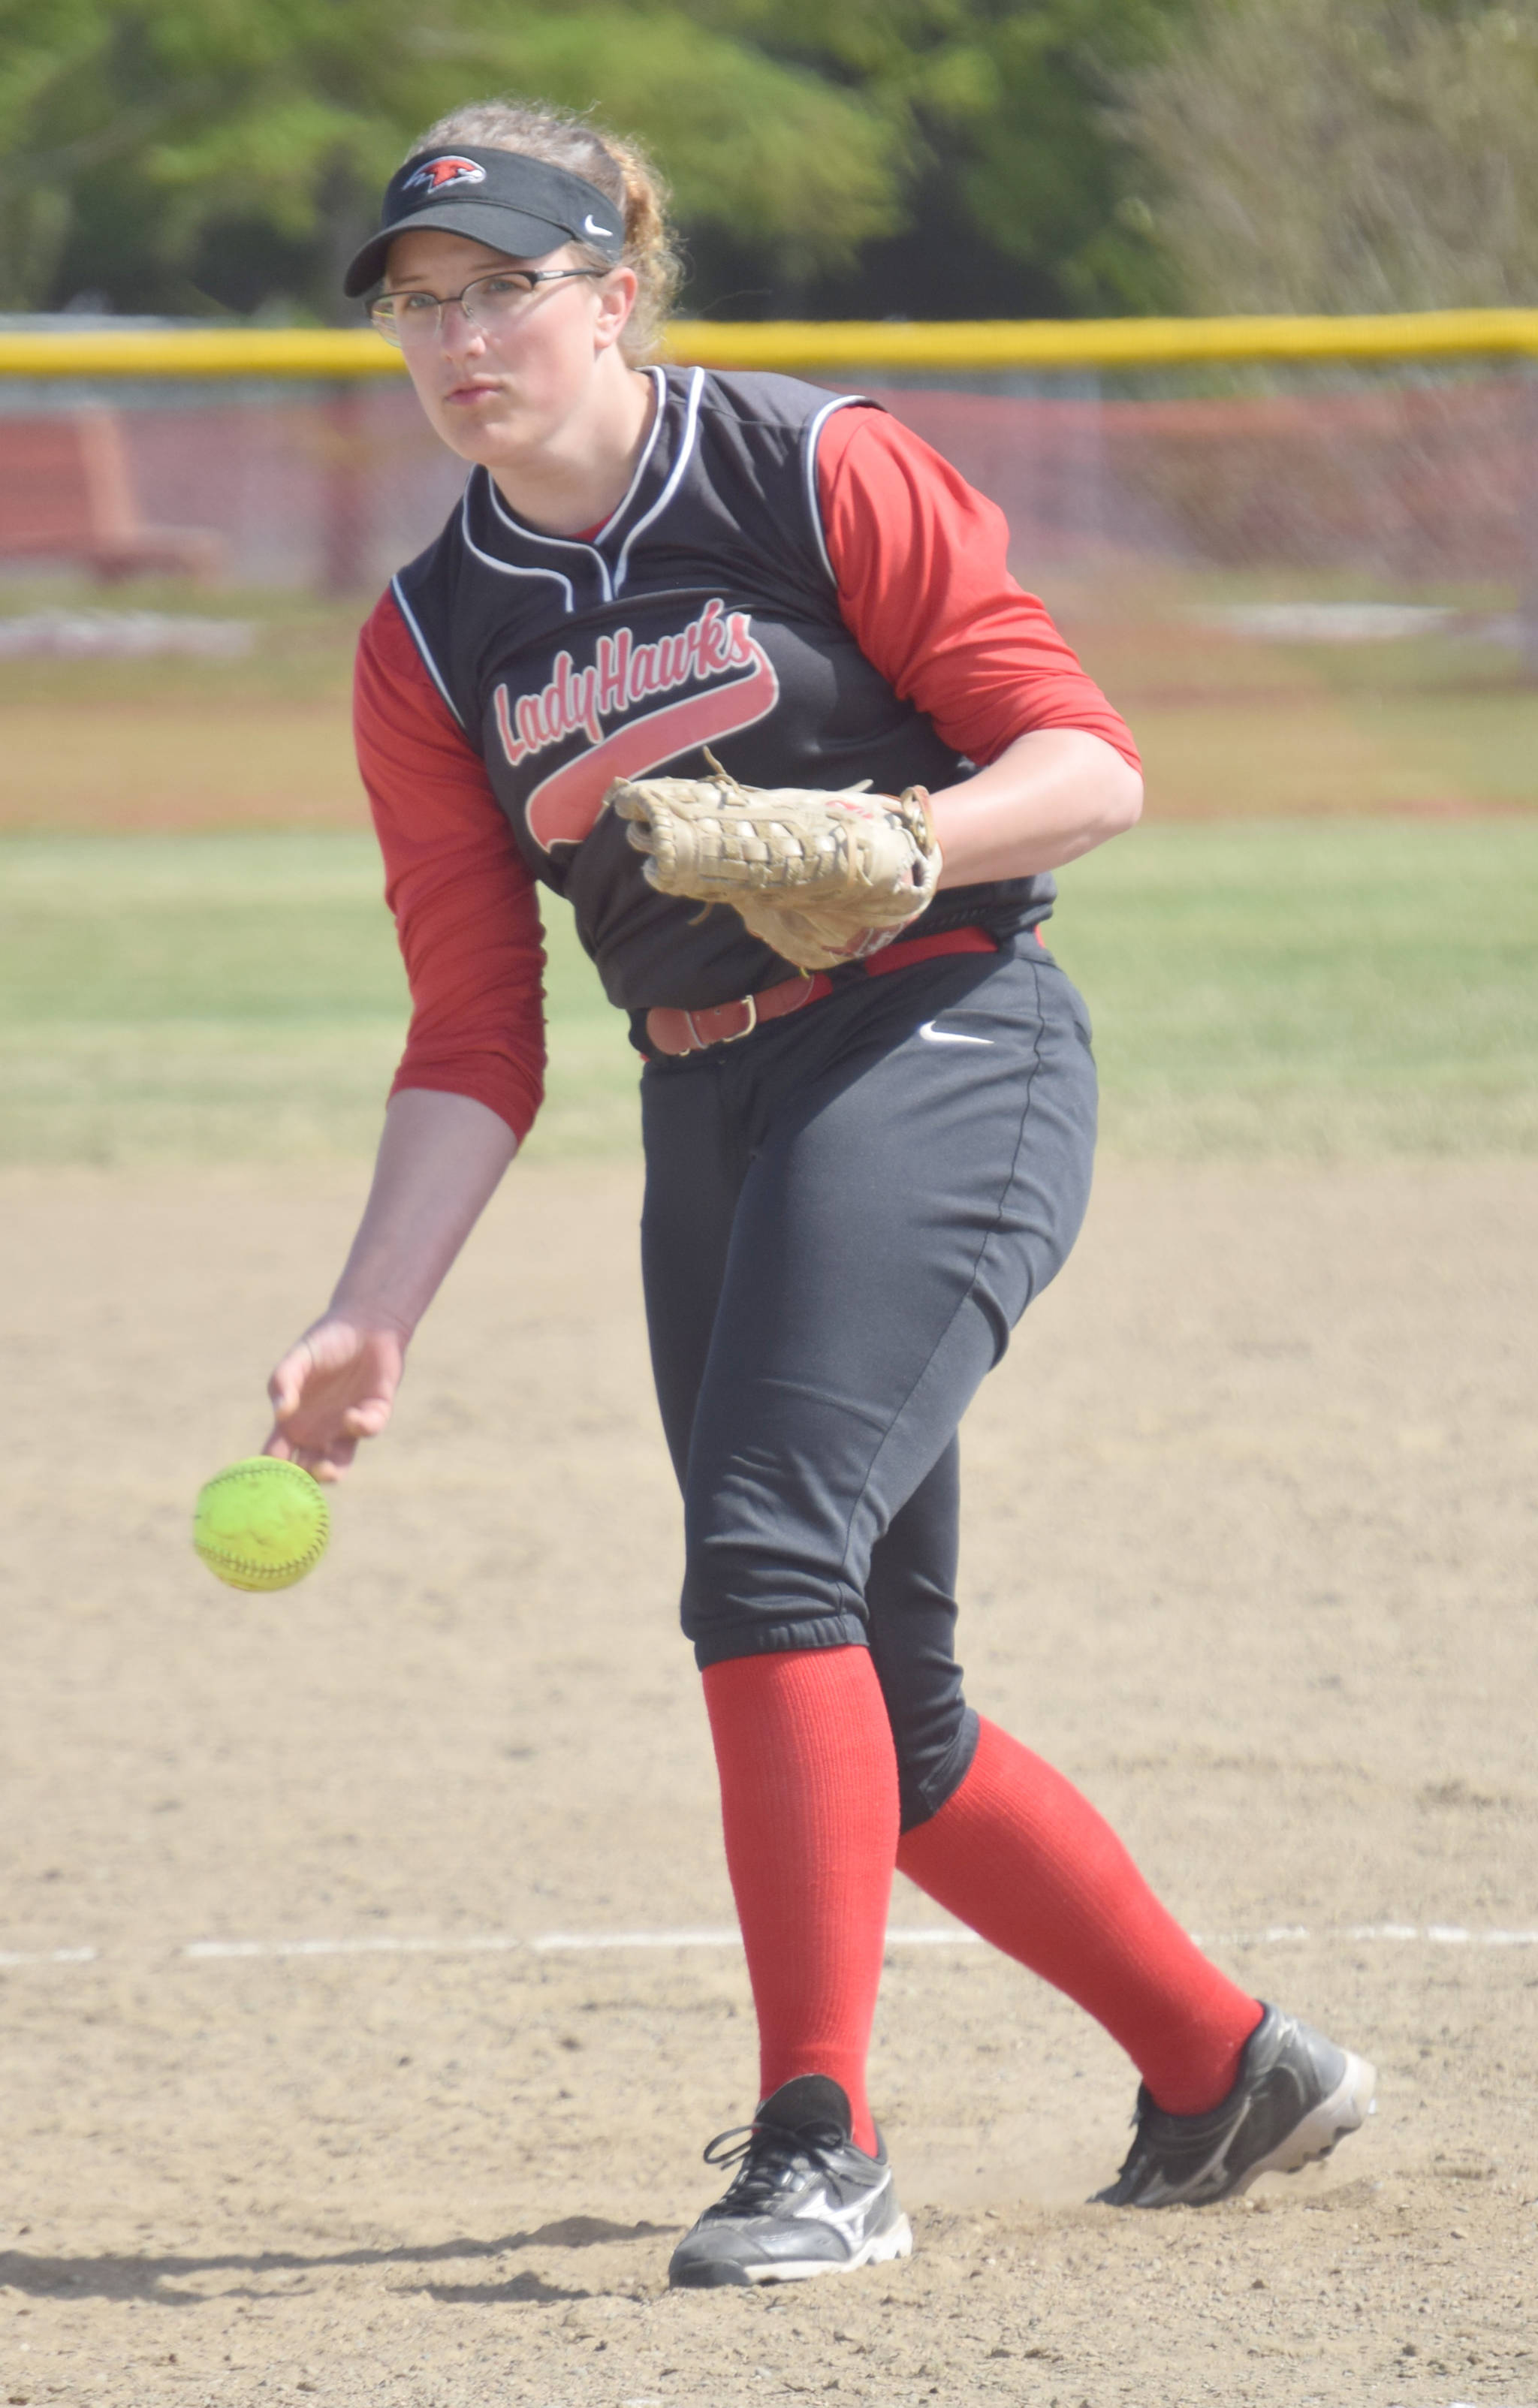 Houston pitcher Cambrie Schultz delivers to Kenai Central on Friday, May 24, 2019, during the Northern Lights Conference softball tournament at Steve Shearer Memorial Ball Park in Kenai, Alaska. (Photo by Jeff Helminiak/Peninsula Clarion)